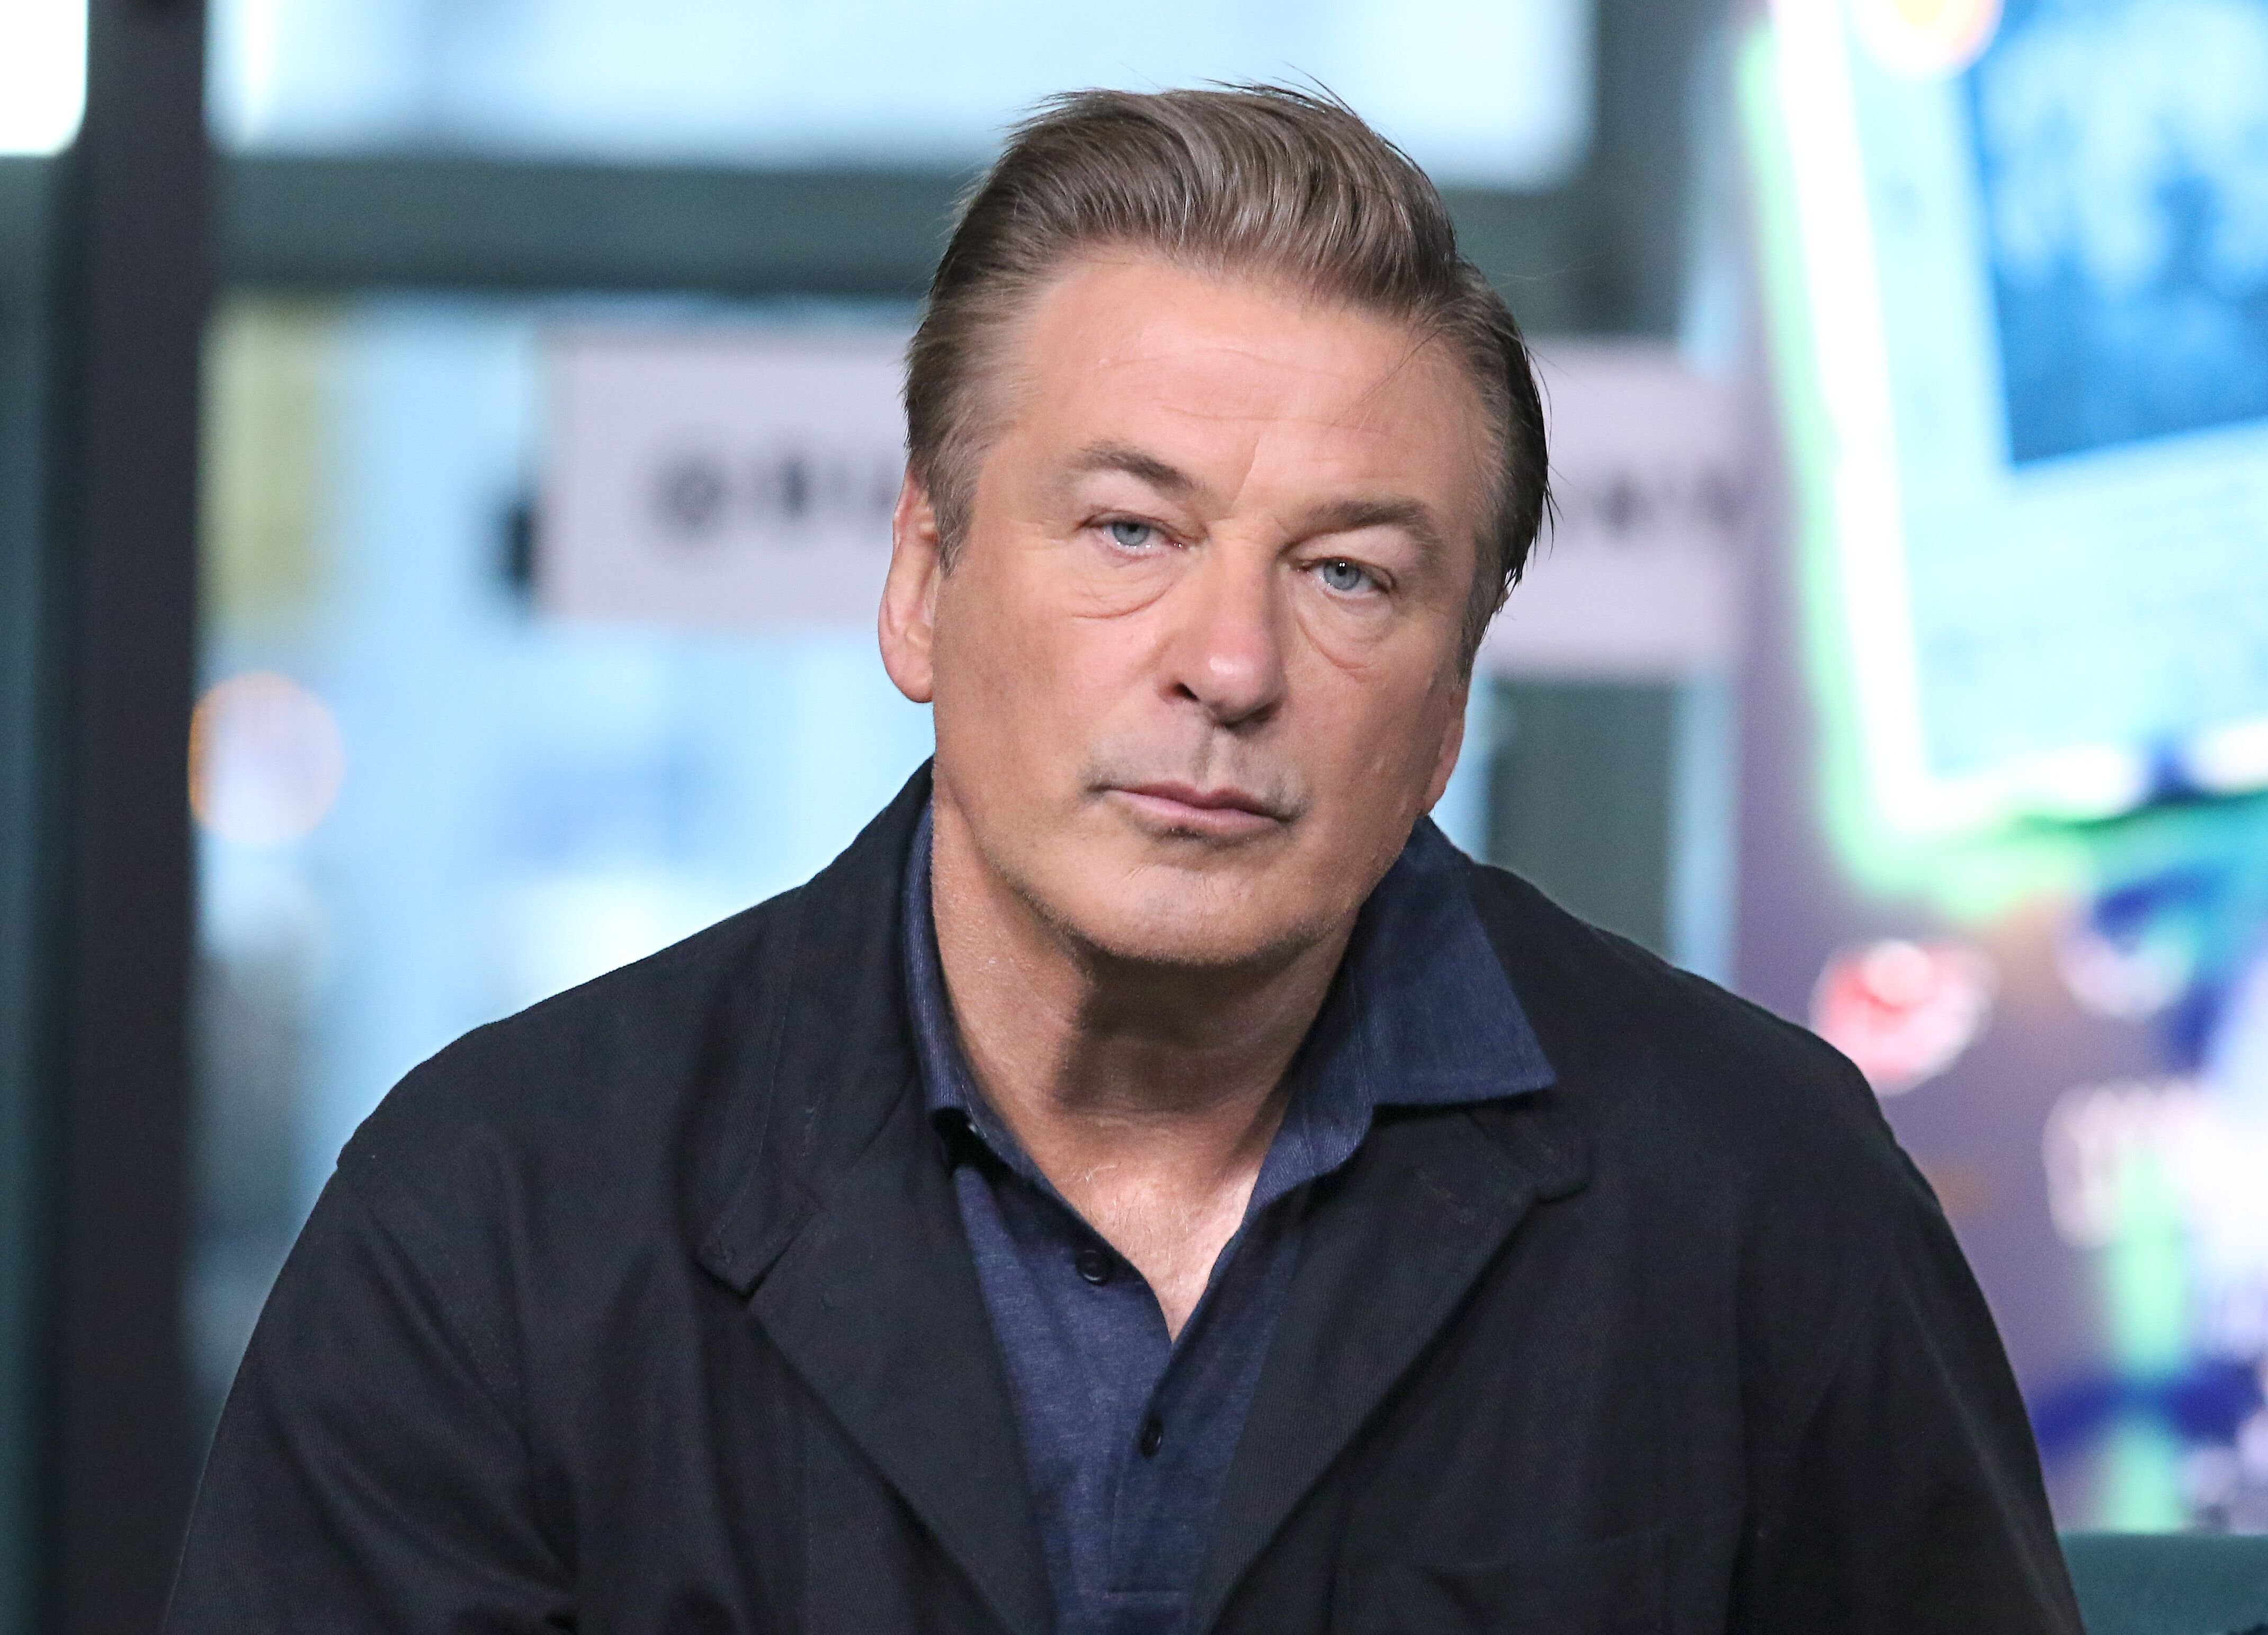 Alec Baldwin attends the Build Series to discuss "Motherless Brooklyn" at Build Studio. | Source: Getty Images